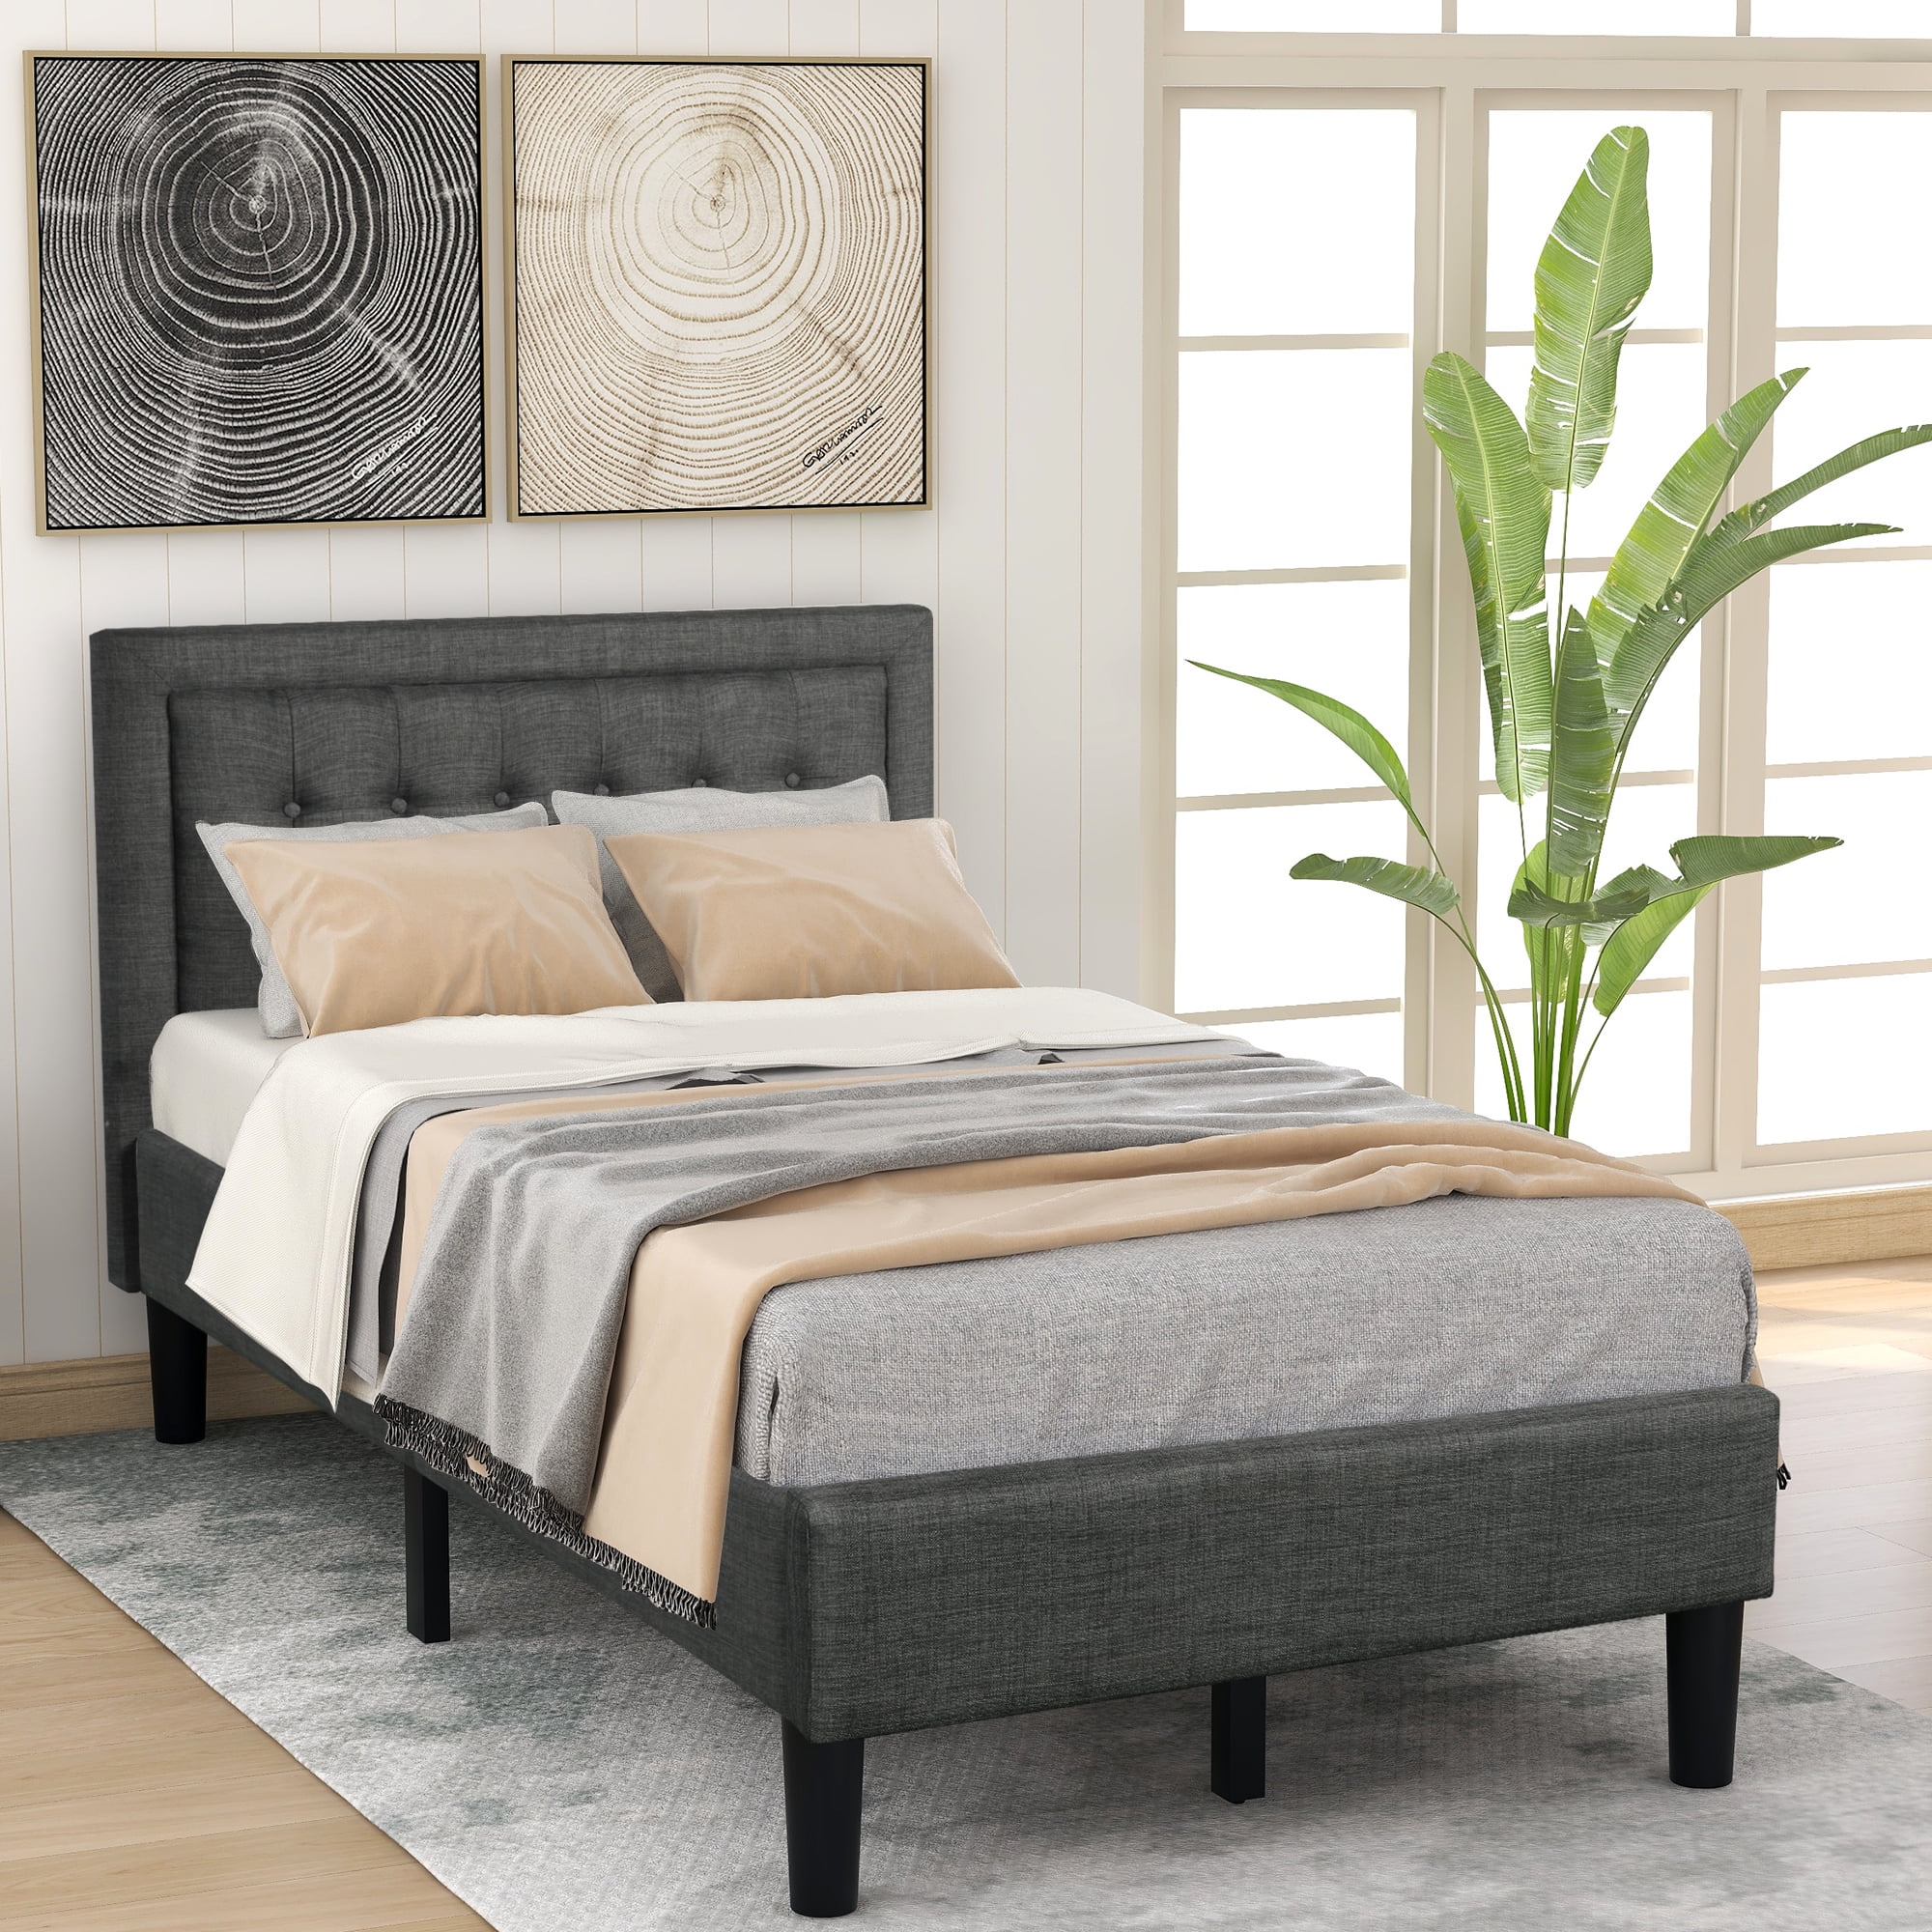 Where Can I Buy A Twin Bed Frame / Wayfair Extra Long Xl Twin Beds You